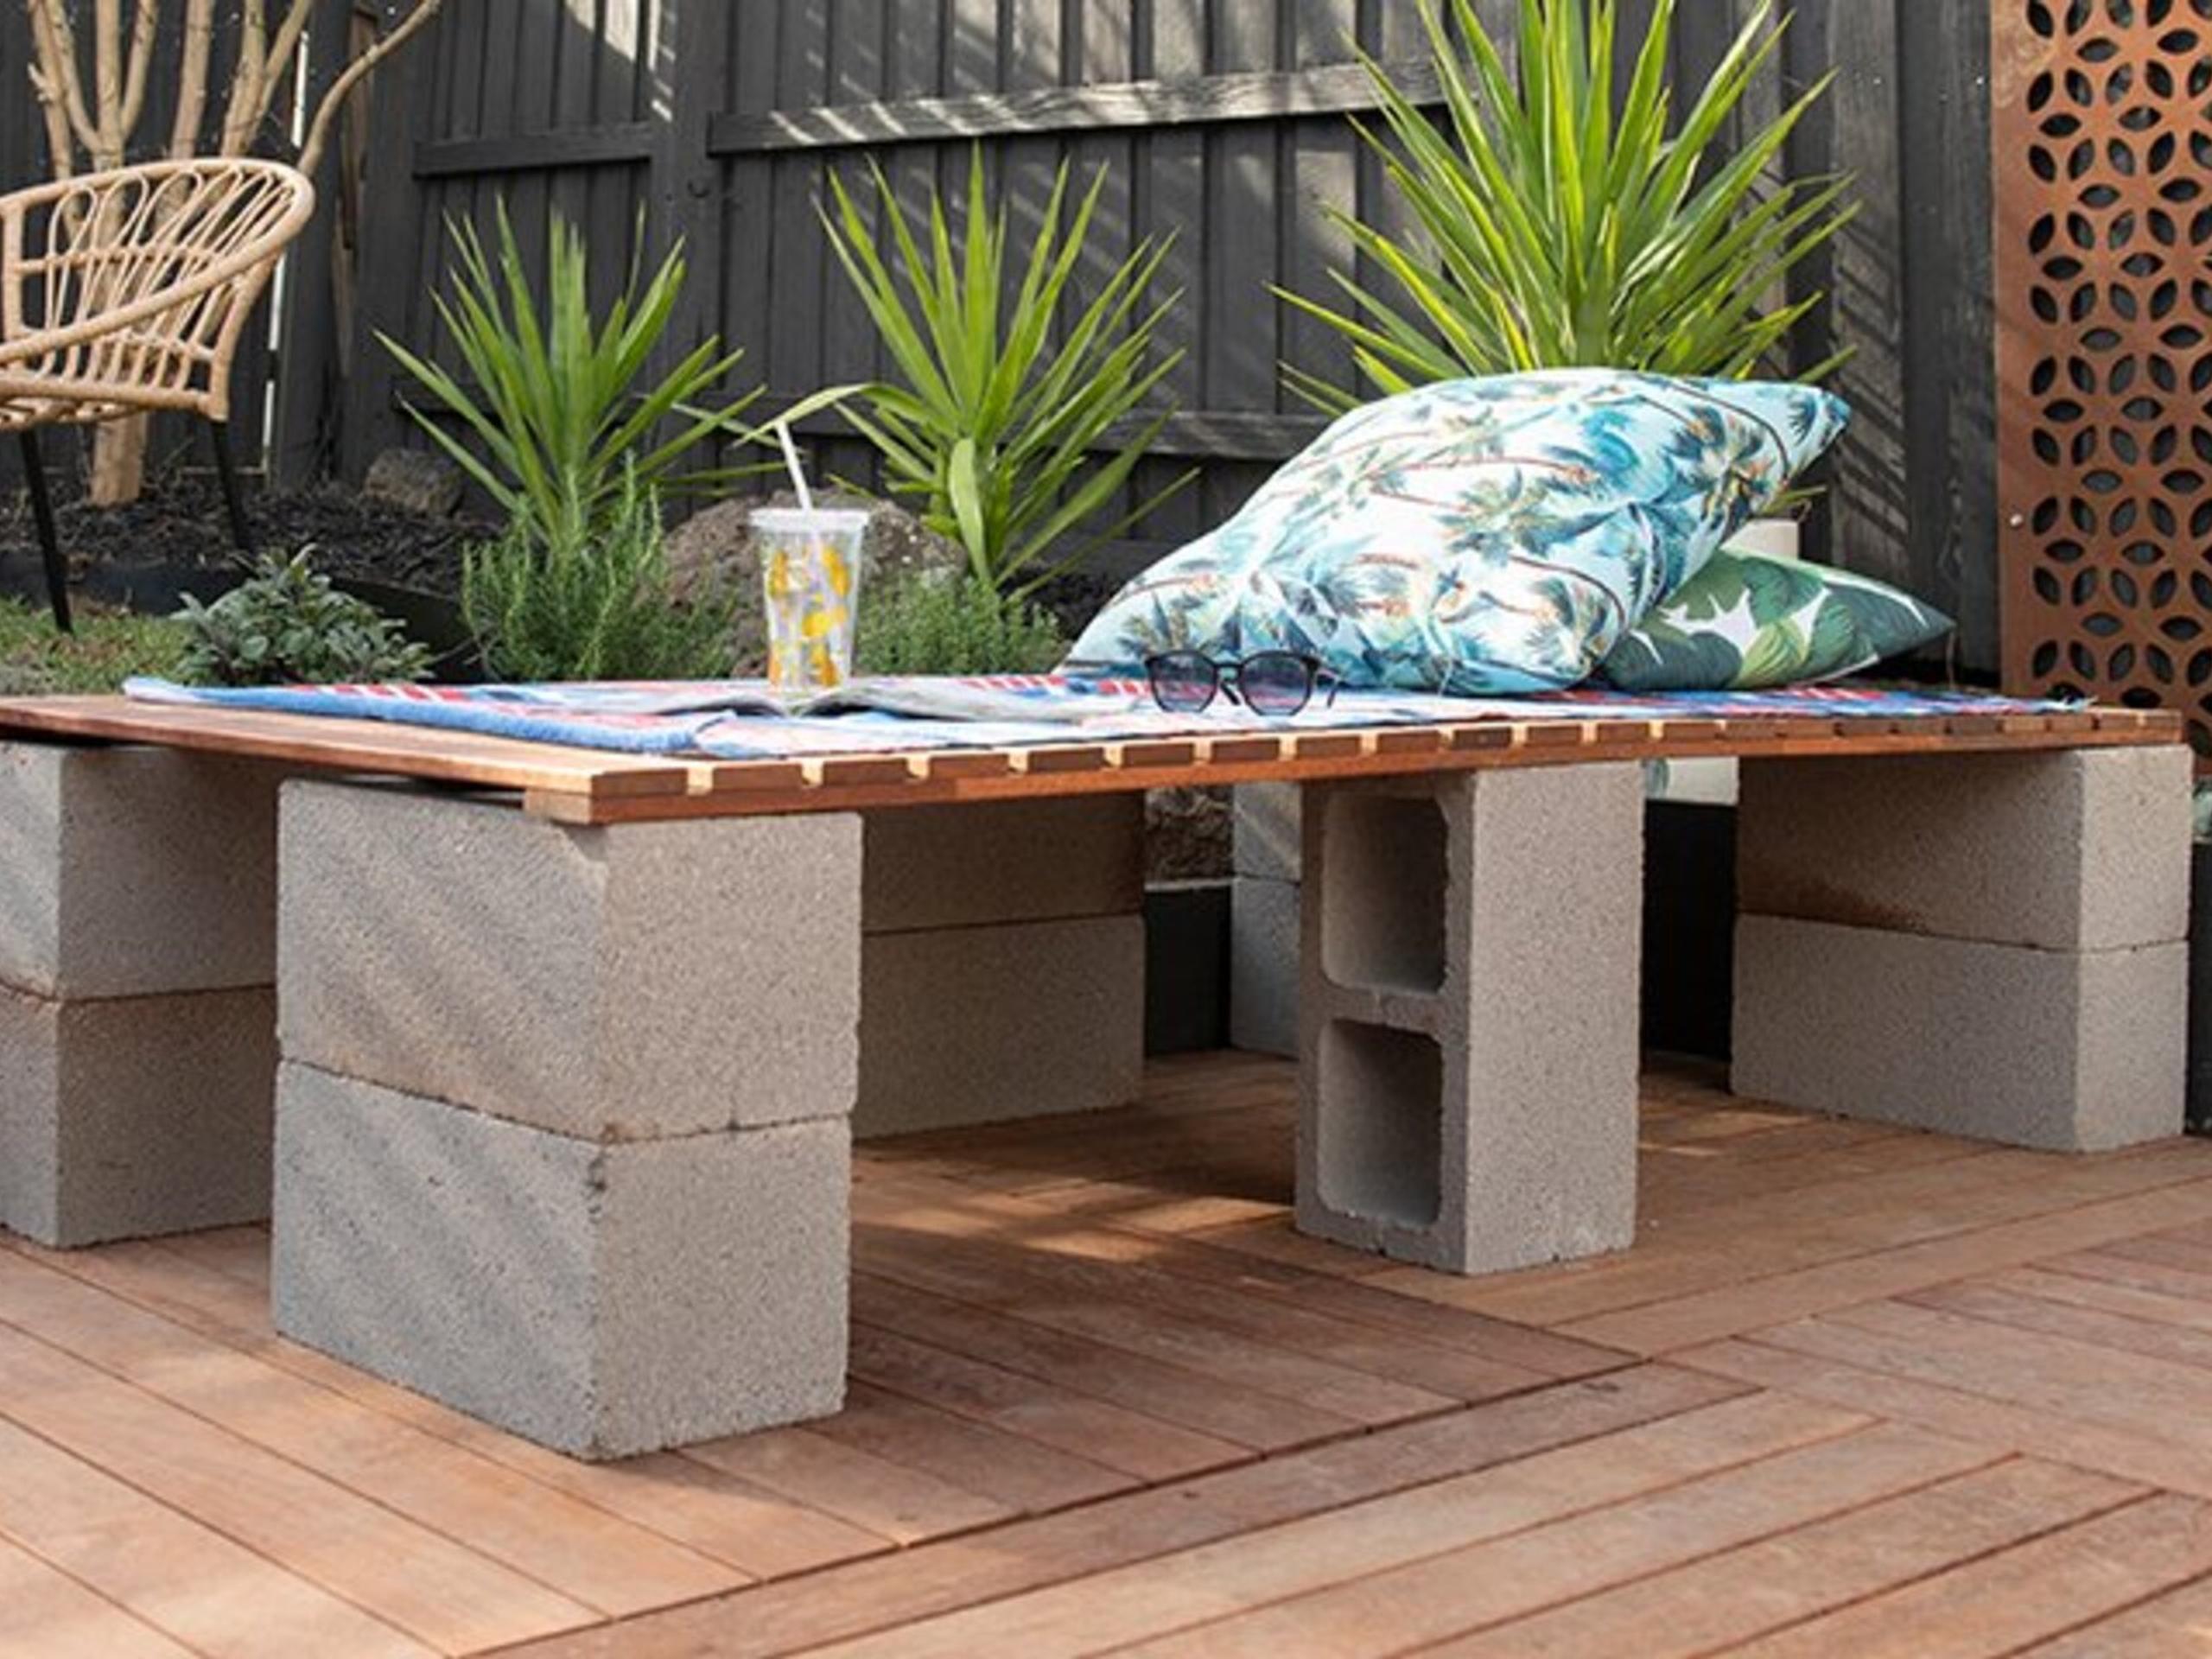 Genius Ways People Are Using Cinder Blocks in Their Backyards - How to Use Cinder  Blocks In Your Backyard